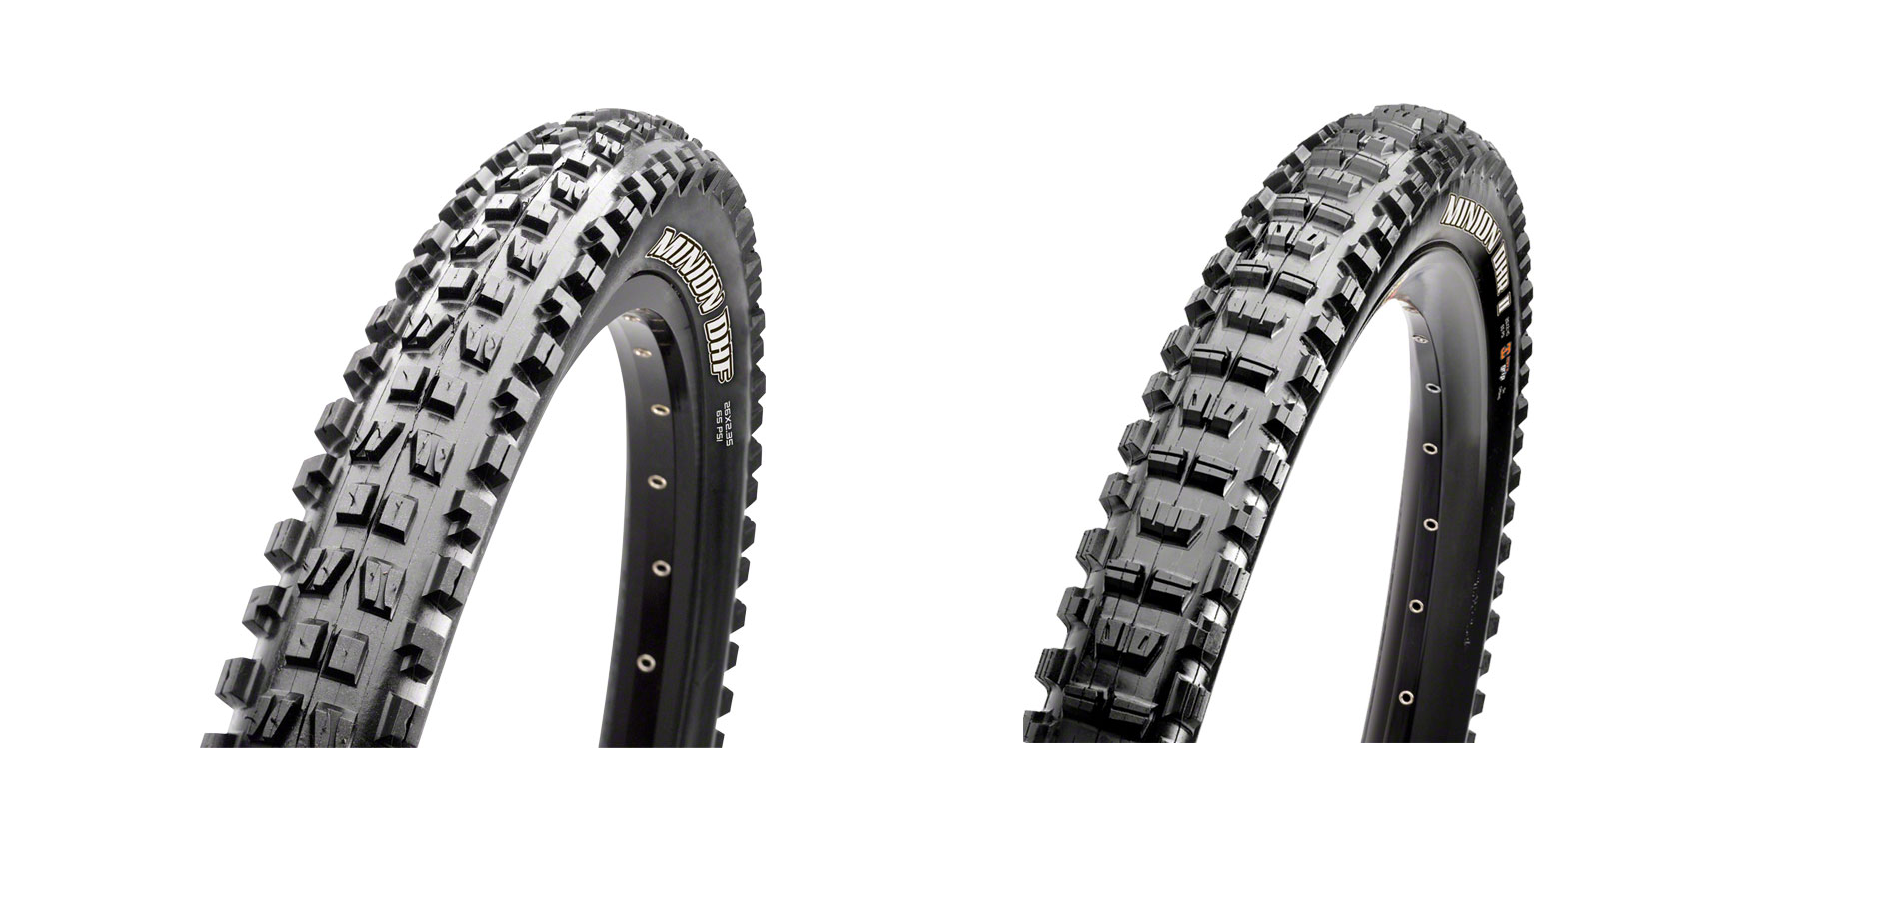 Maxxis Minion DHF 29x2.3 and DHR II 29x2.3 Tire Combo EXO Tubeless Ready 2C MPN: TB96785000, TB96776000 Tires Minion DHF Tire